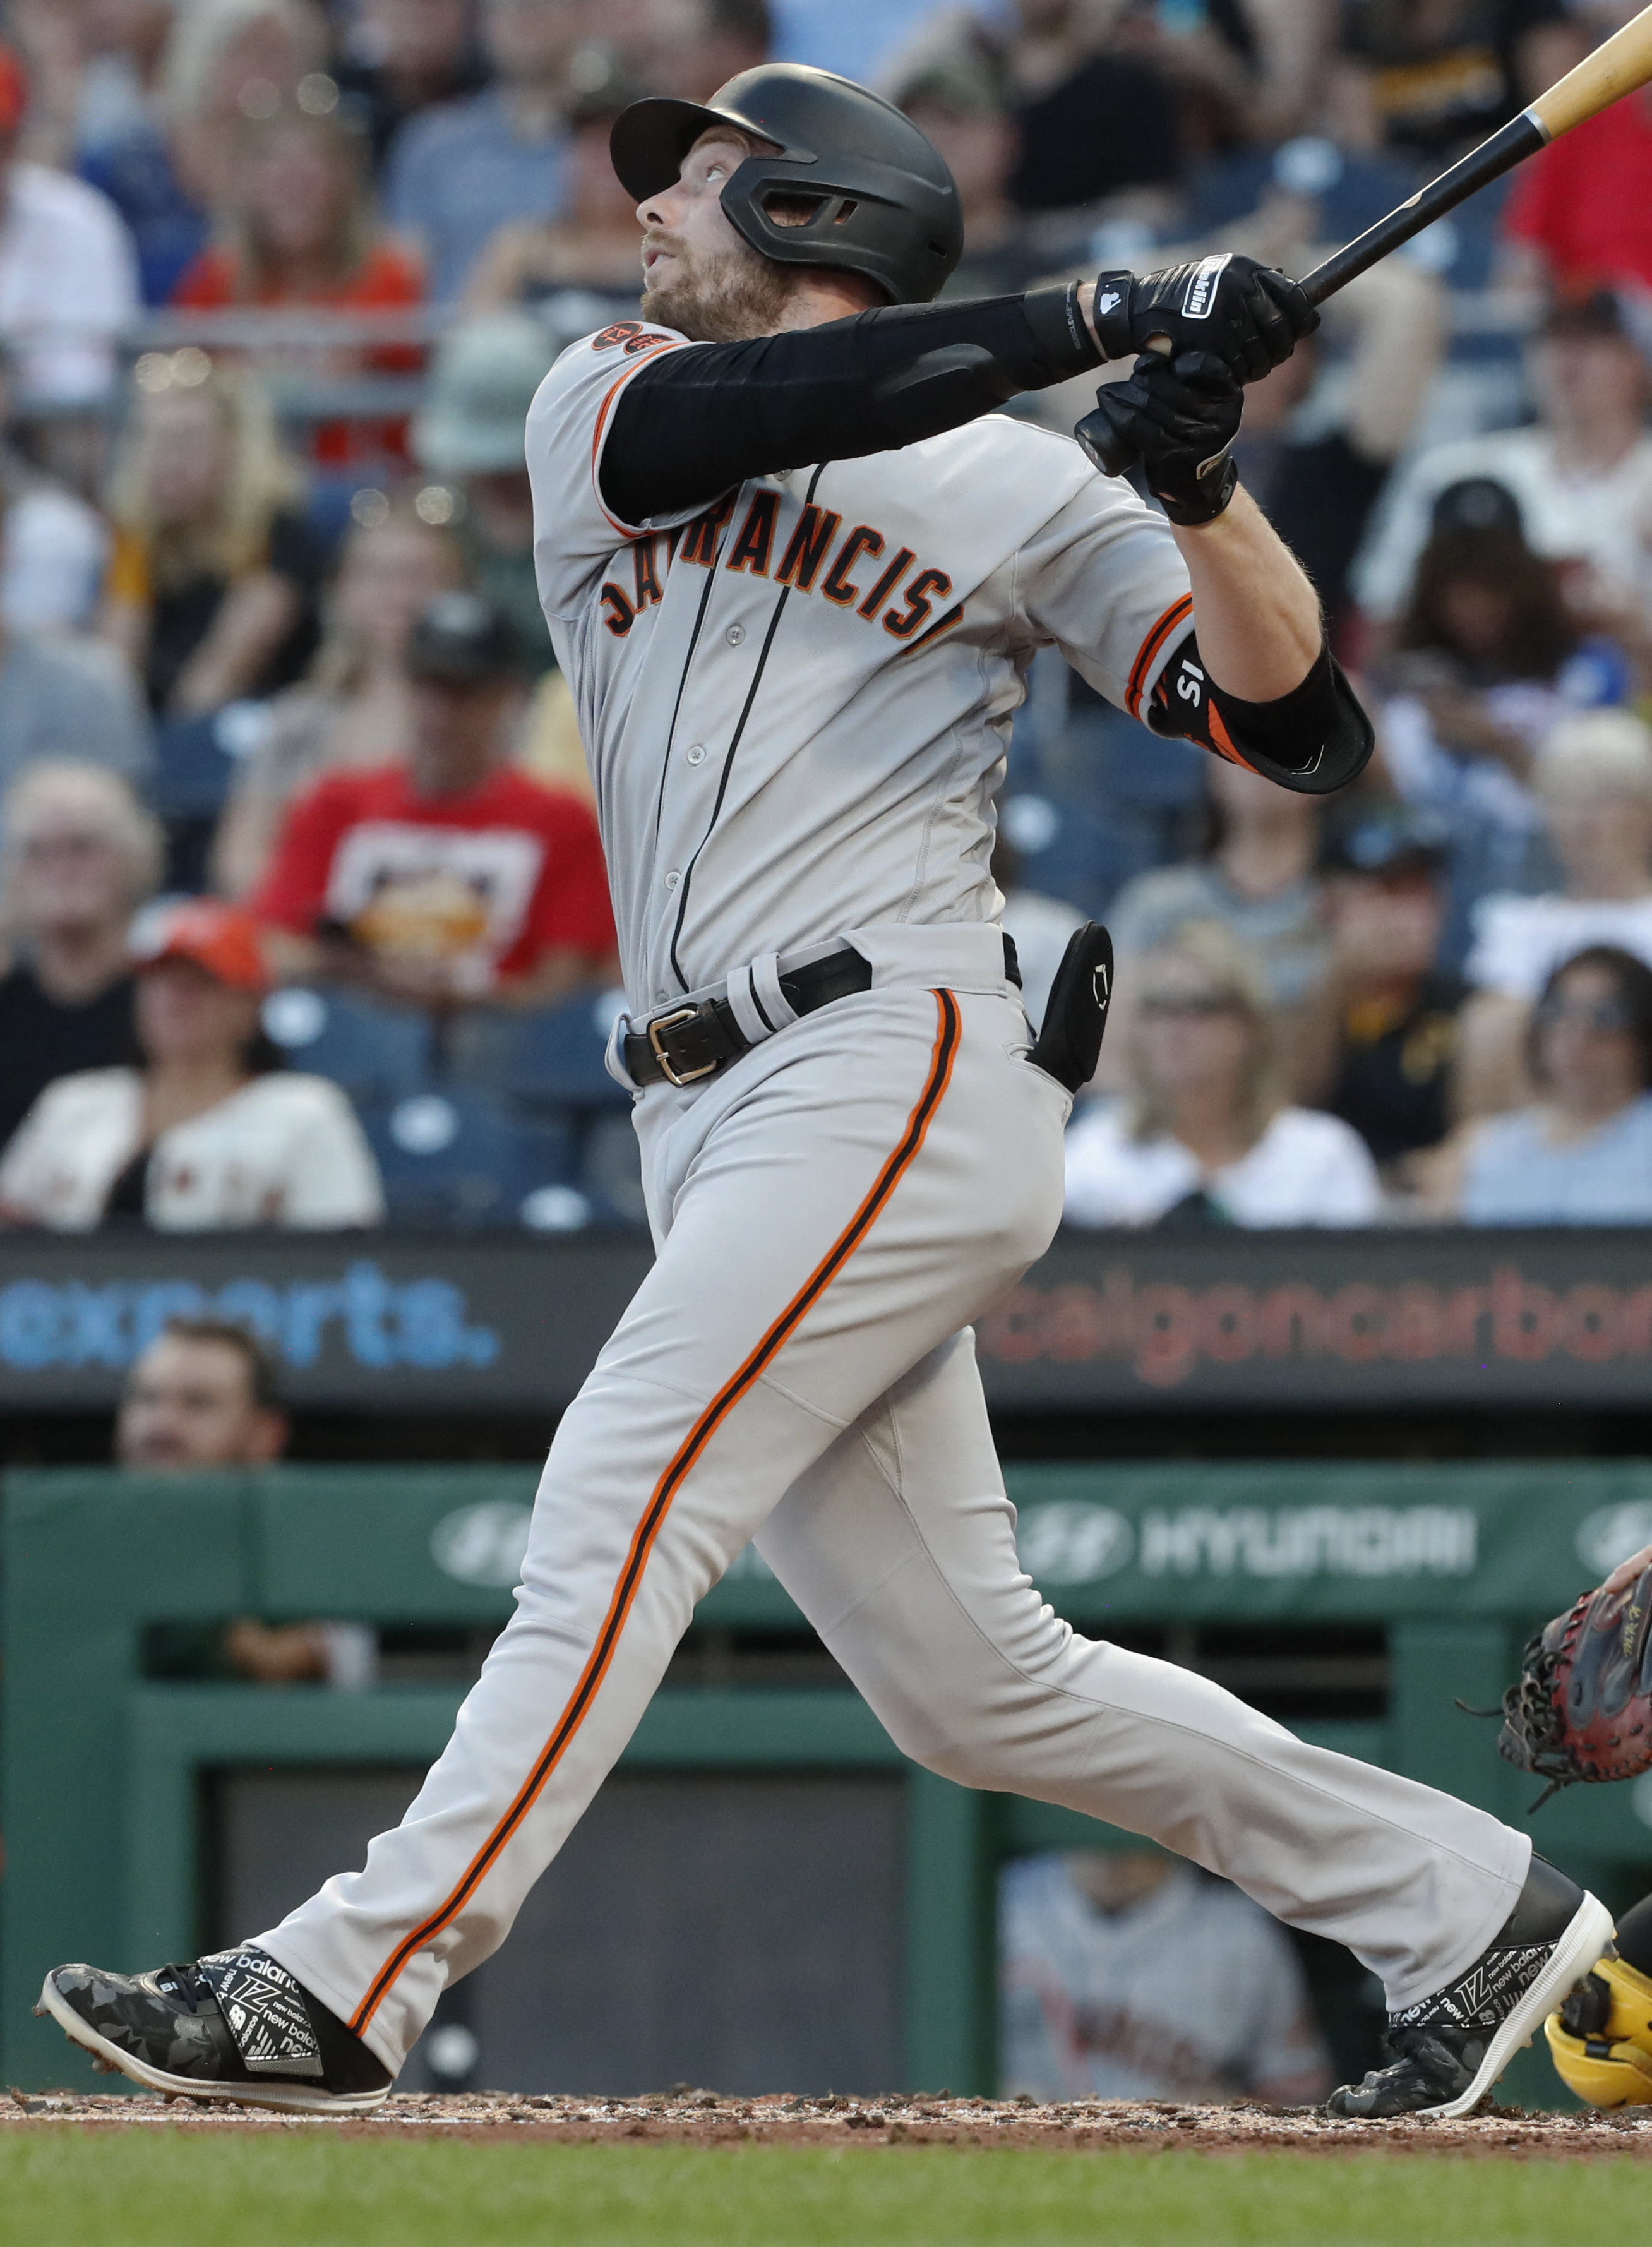 Giants beat Pirates 4-3 on Barmes' error in 9th - The San Diego